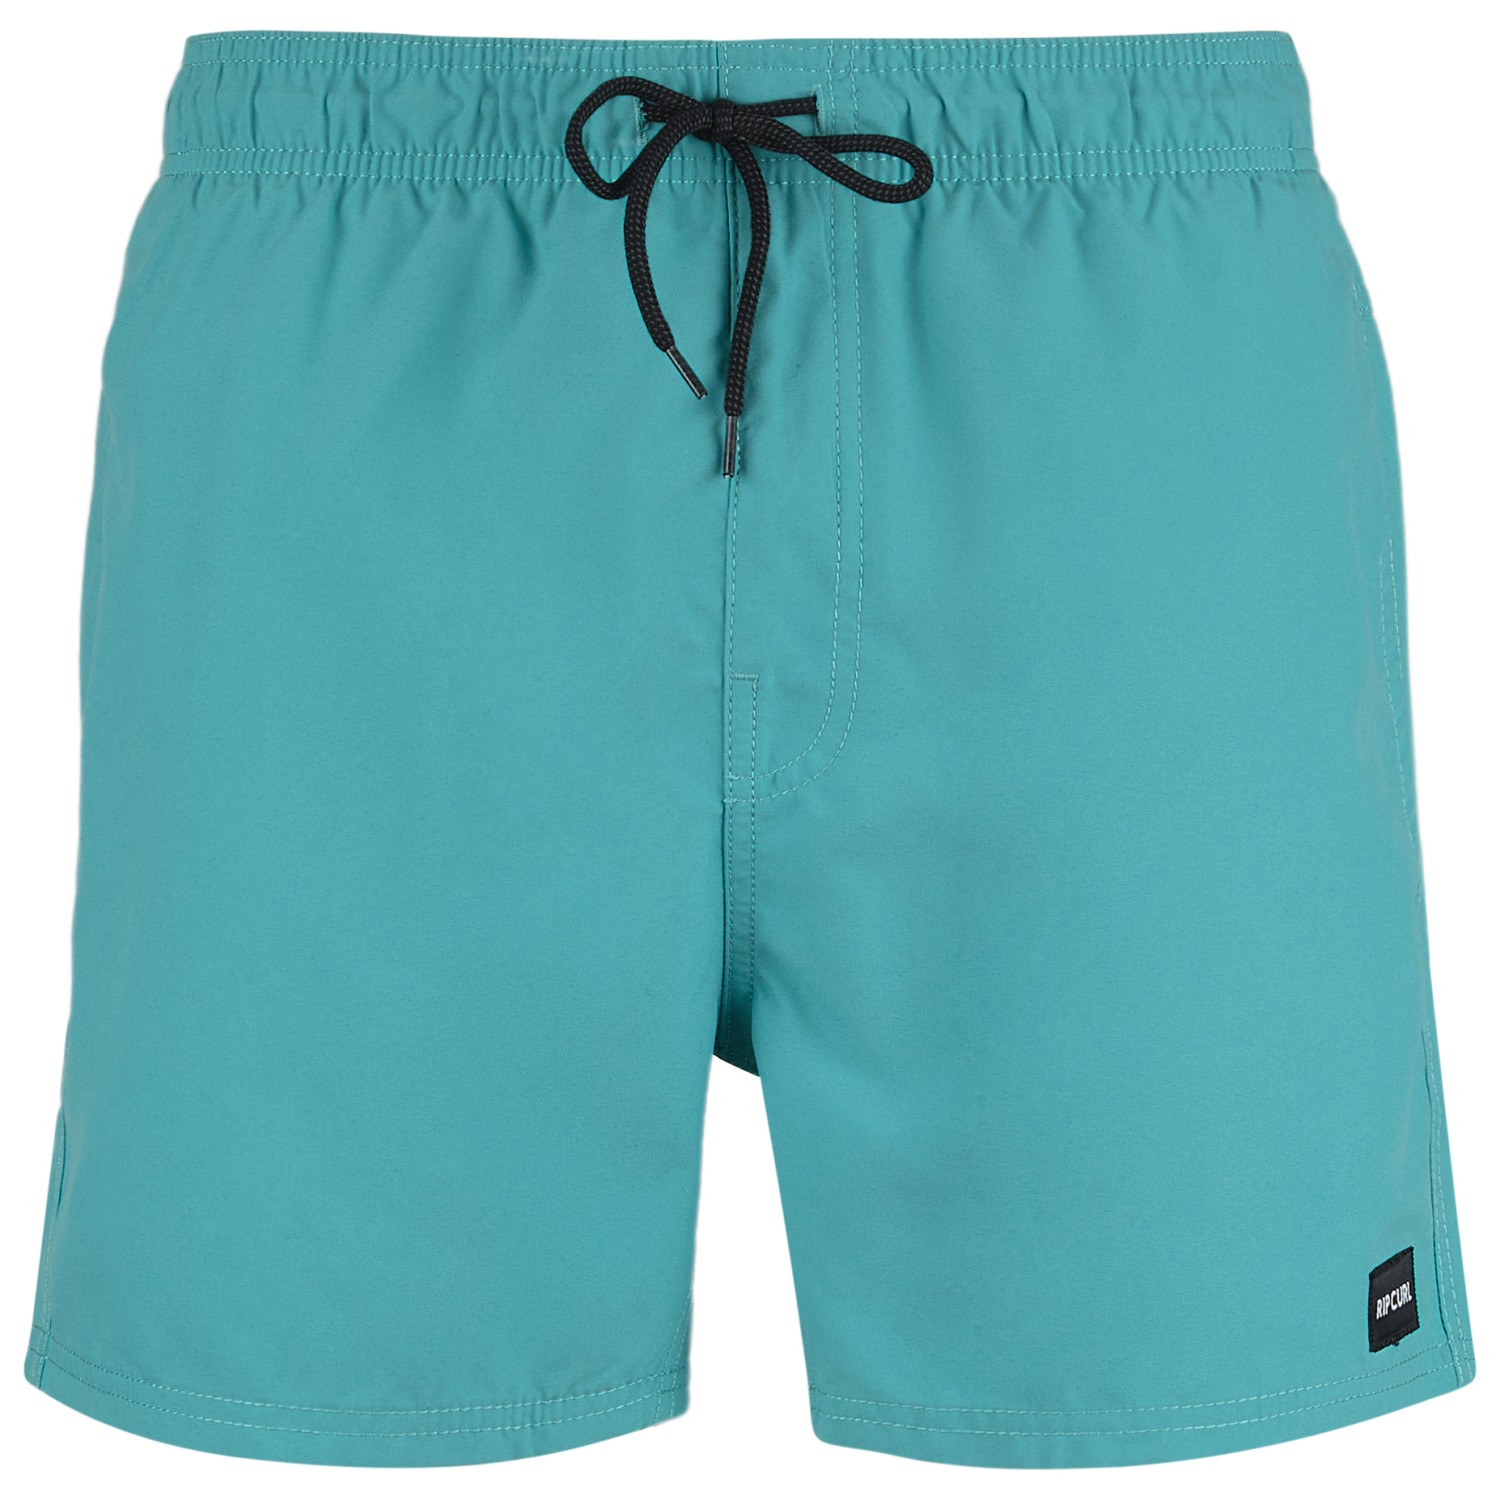 Плавки Rip Curl Offset 15'' Volley, цвет Teal